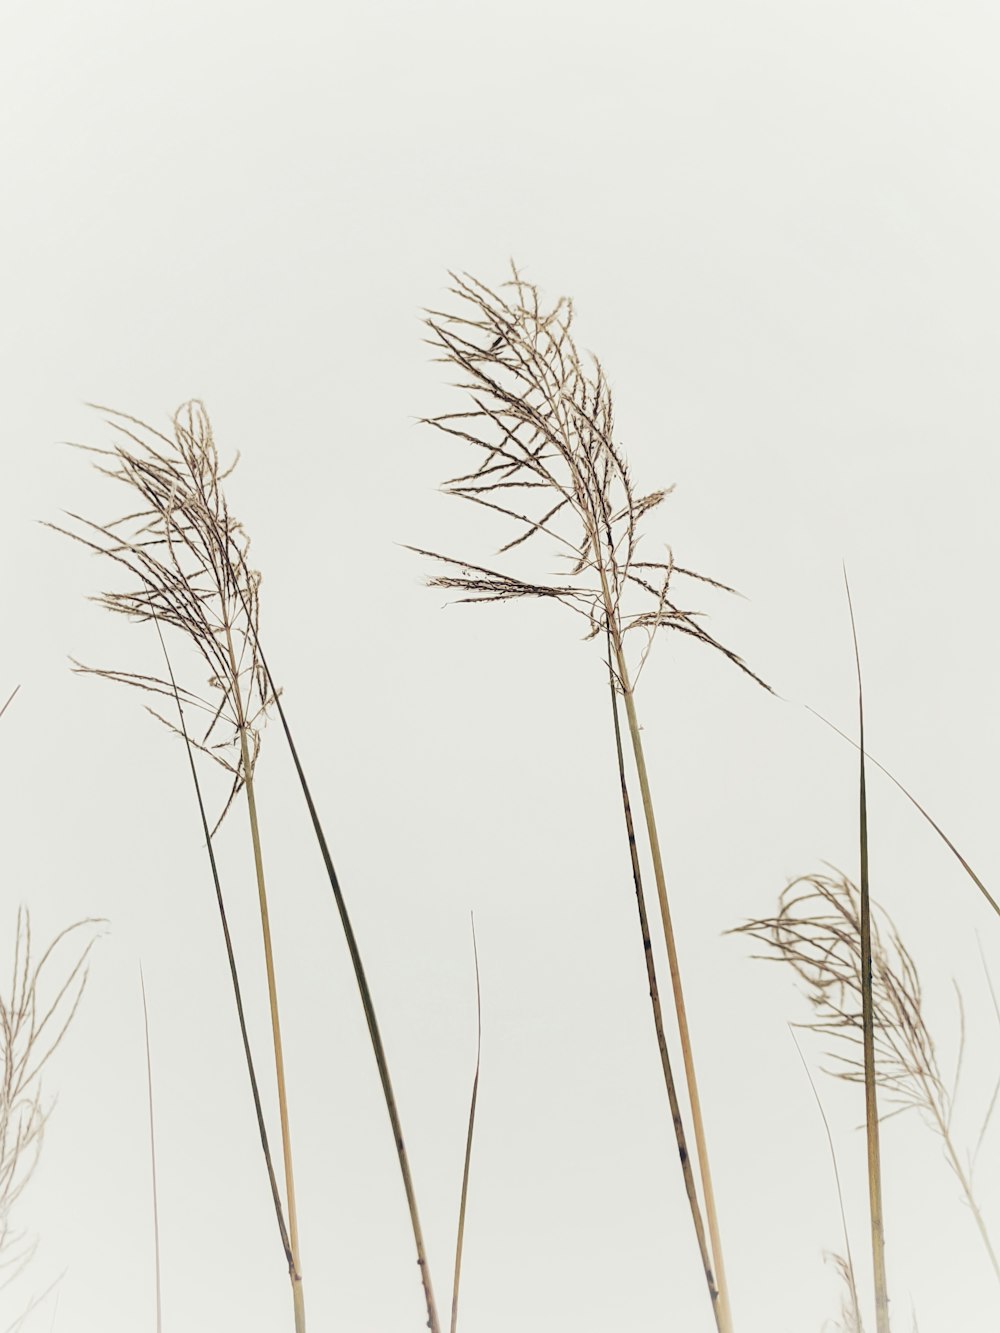 a group of tall dry grass blowing in the wind